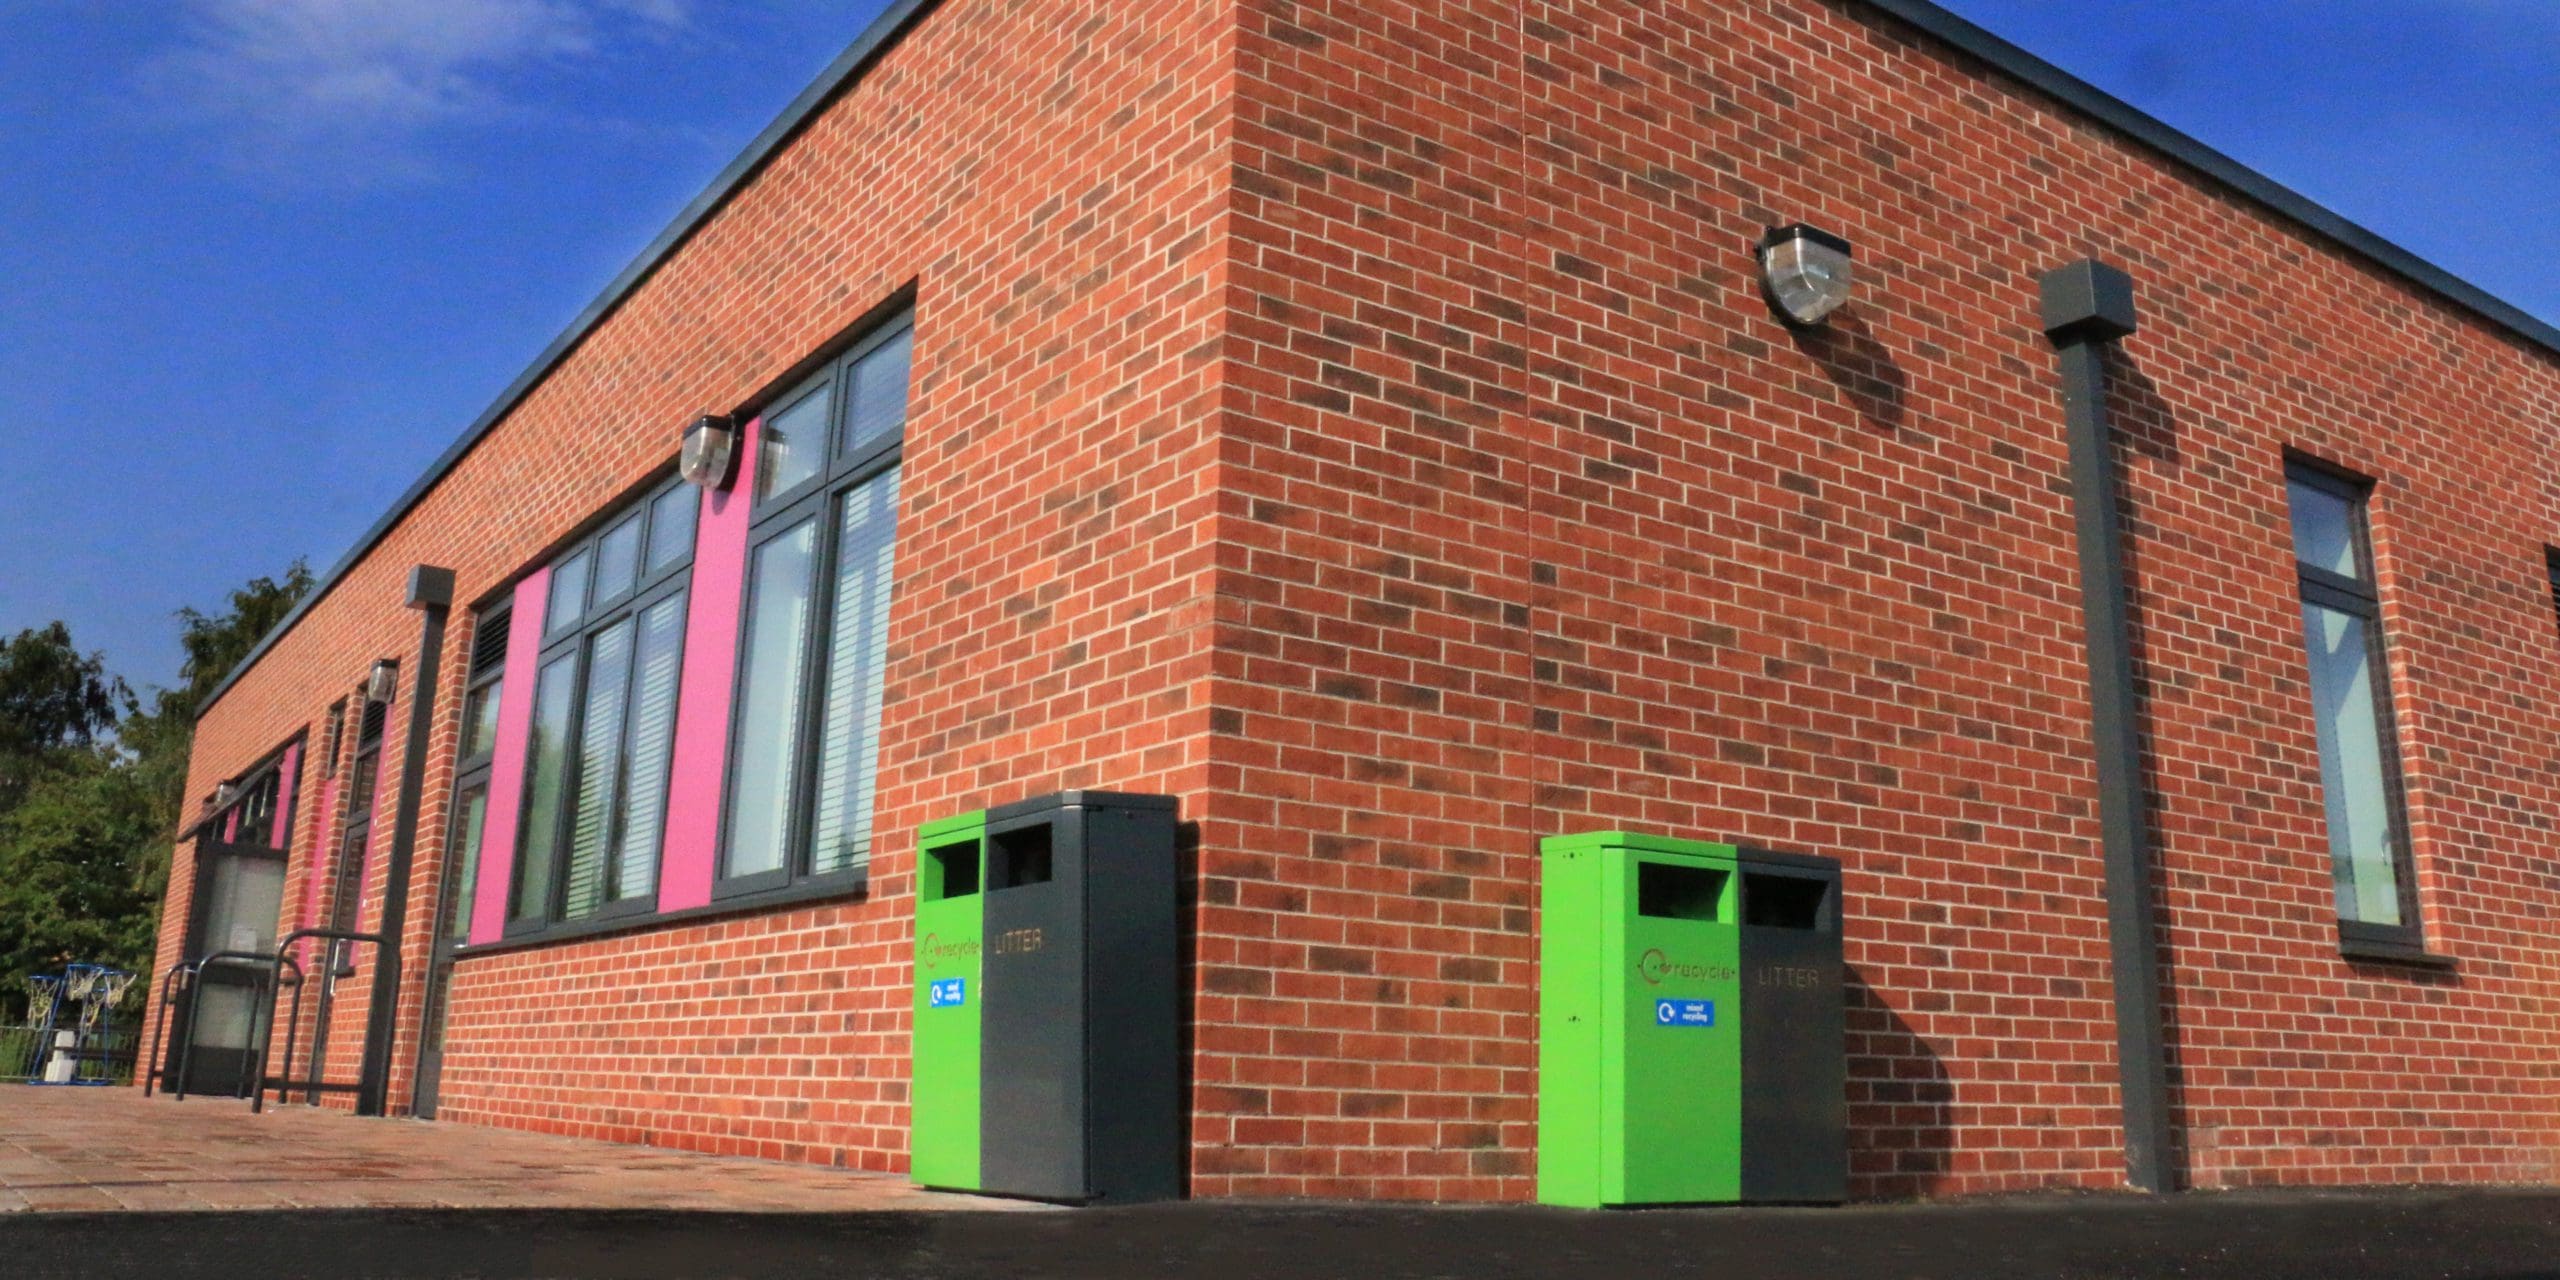 corner of school building showing outdoor split green and black metal bins for rubbish and recycling